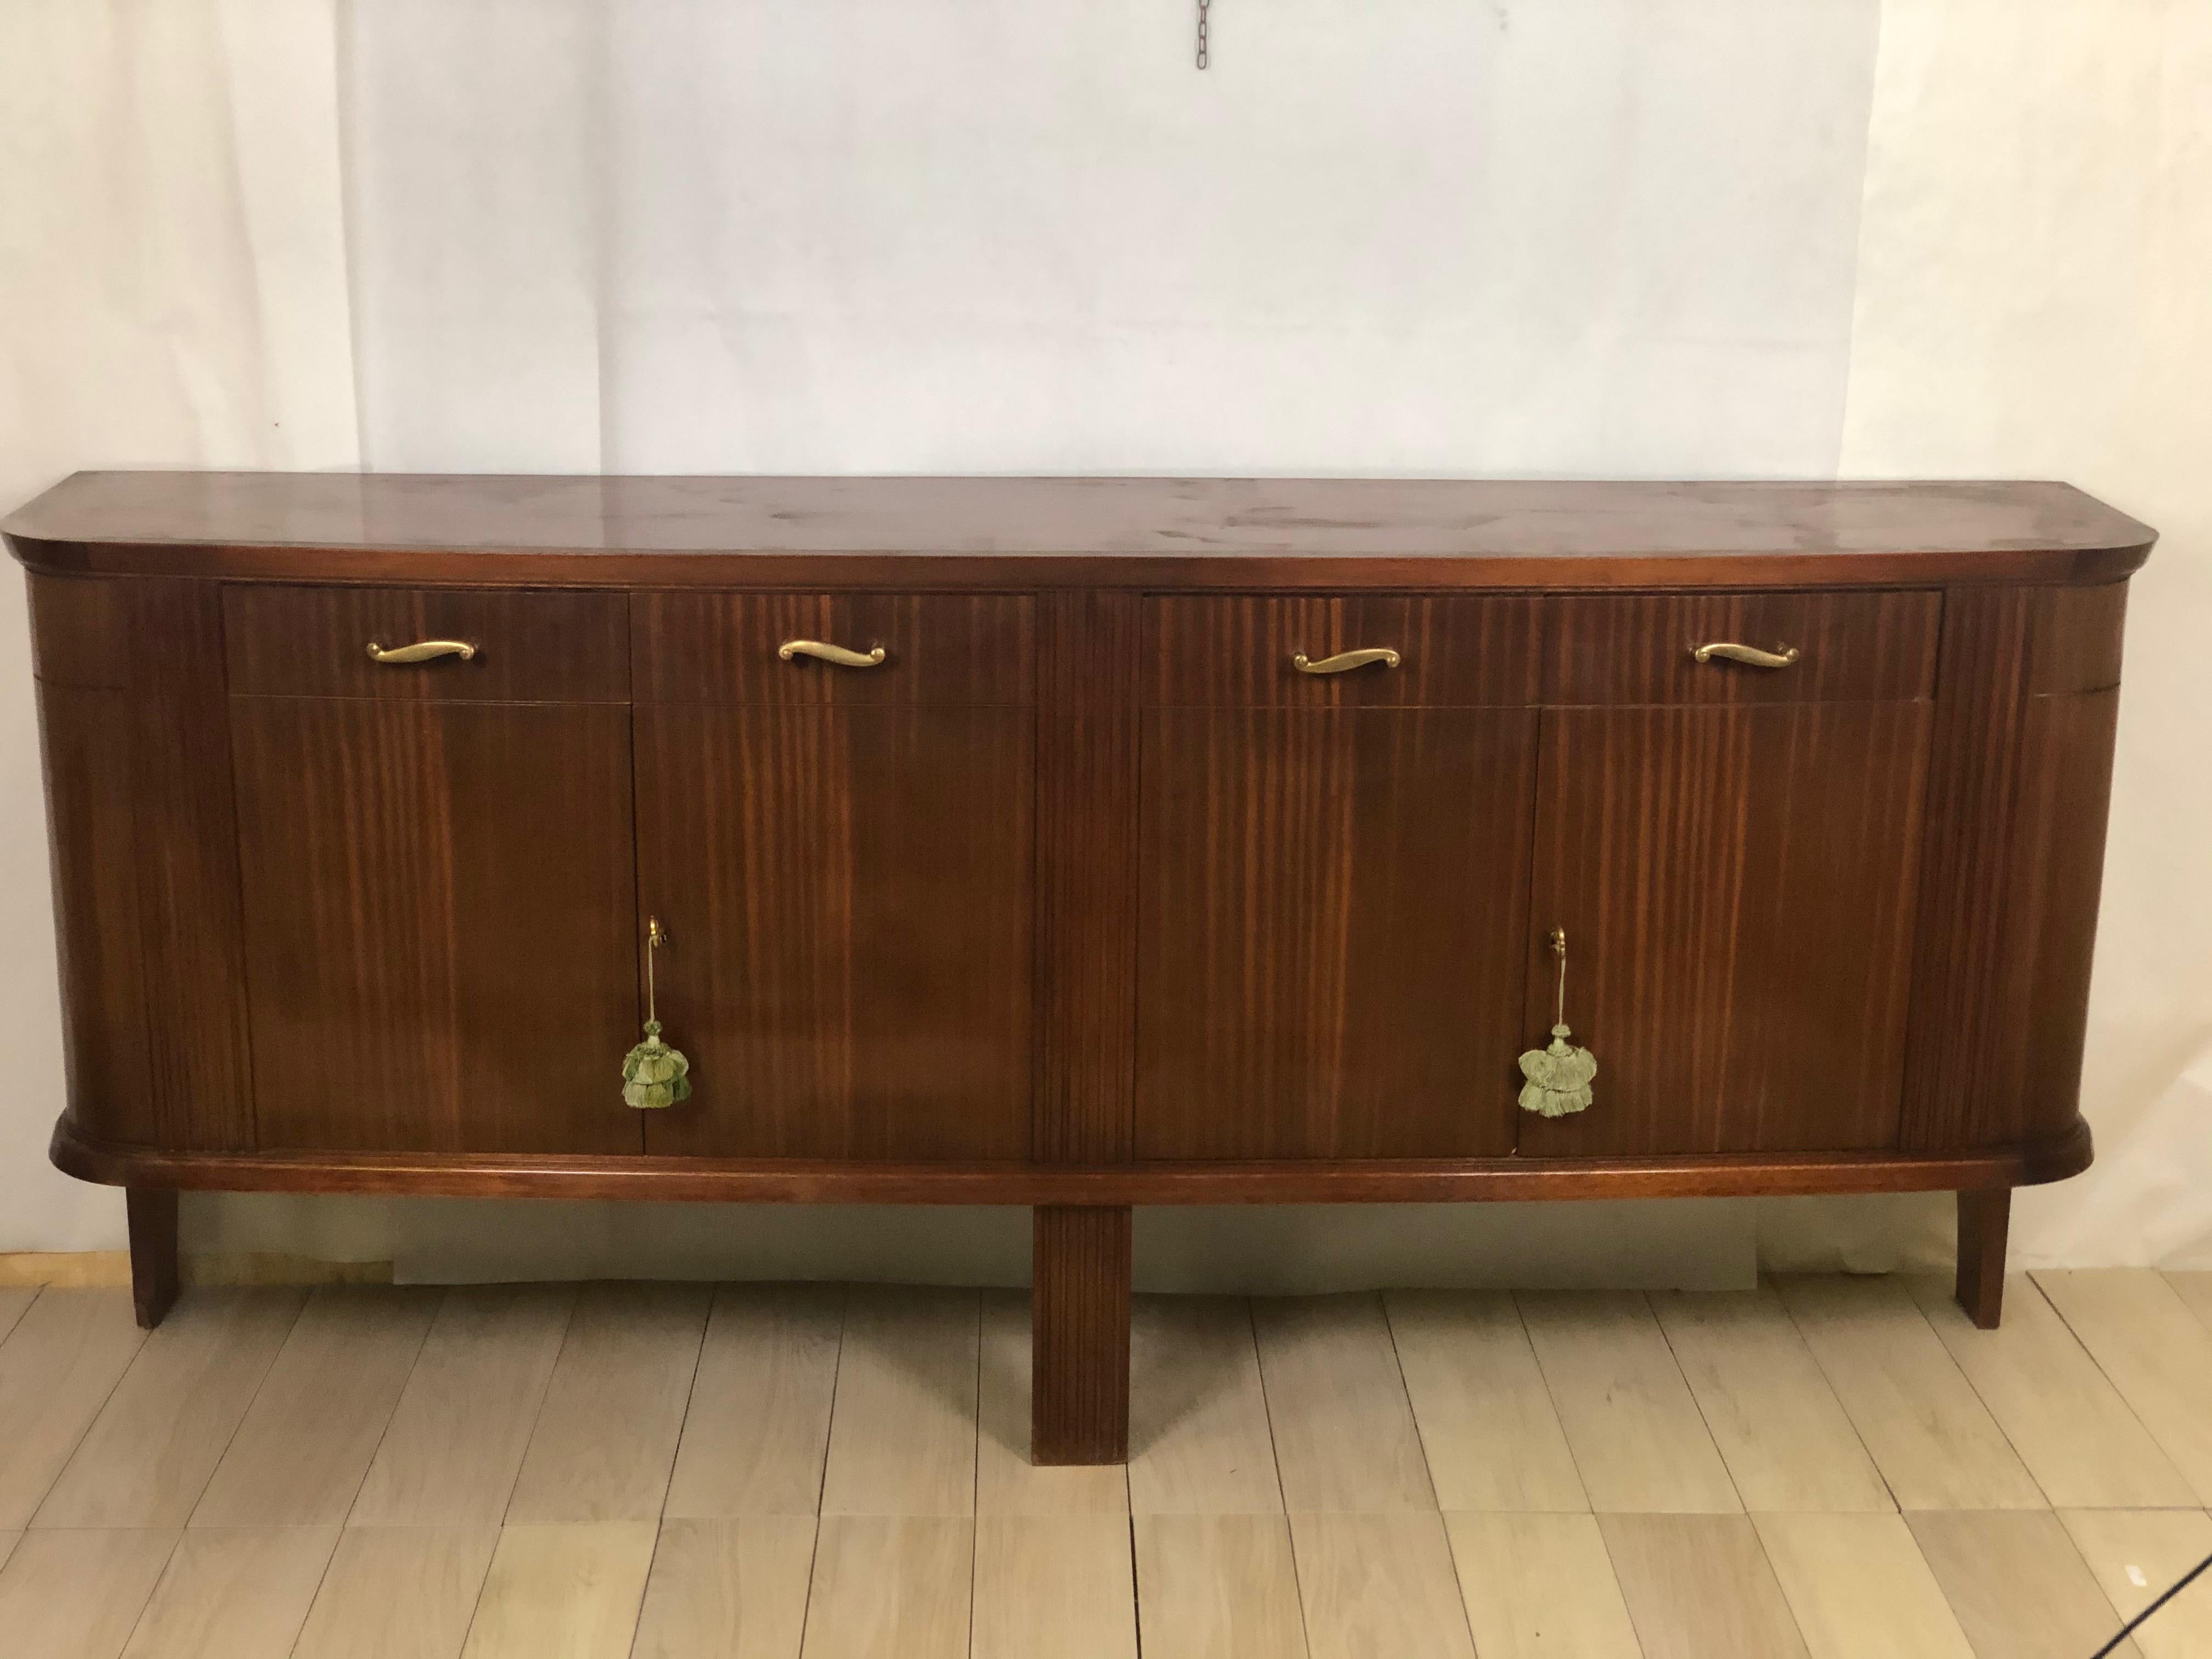 Interesting sideboard in light mahogany with 4 drawers and 4 doors resting only on three feet of the slim profile with light grooves.
Very intriguing design, suitable as a sideboard, but also very comfortable for a bathroom cabinet. In perfect